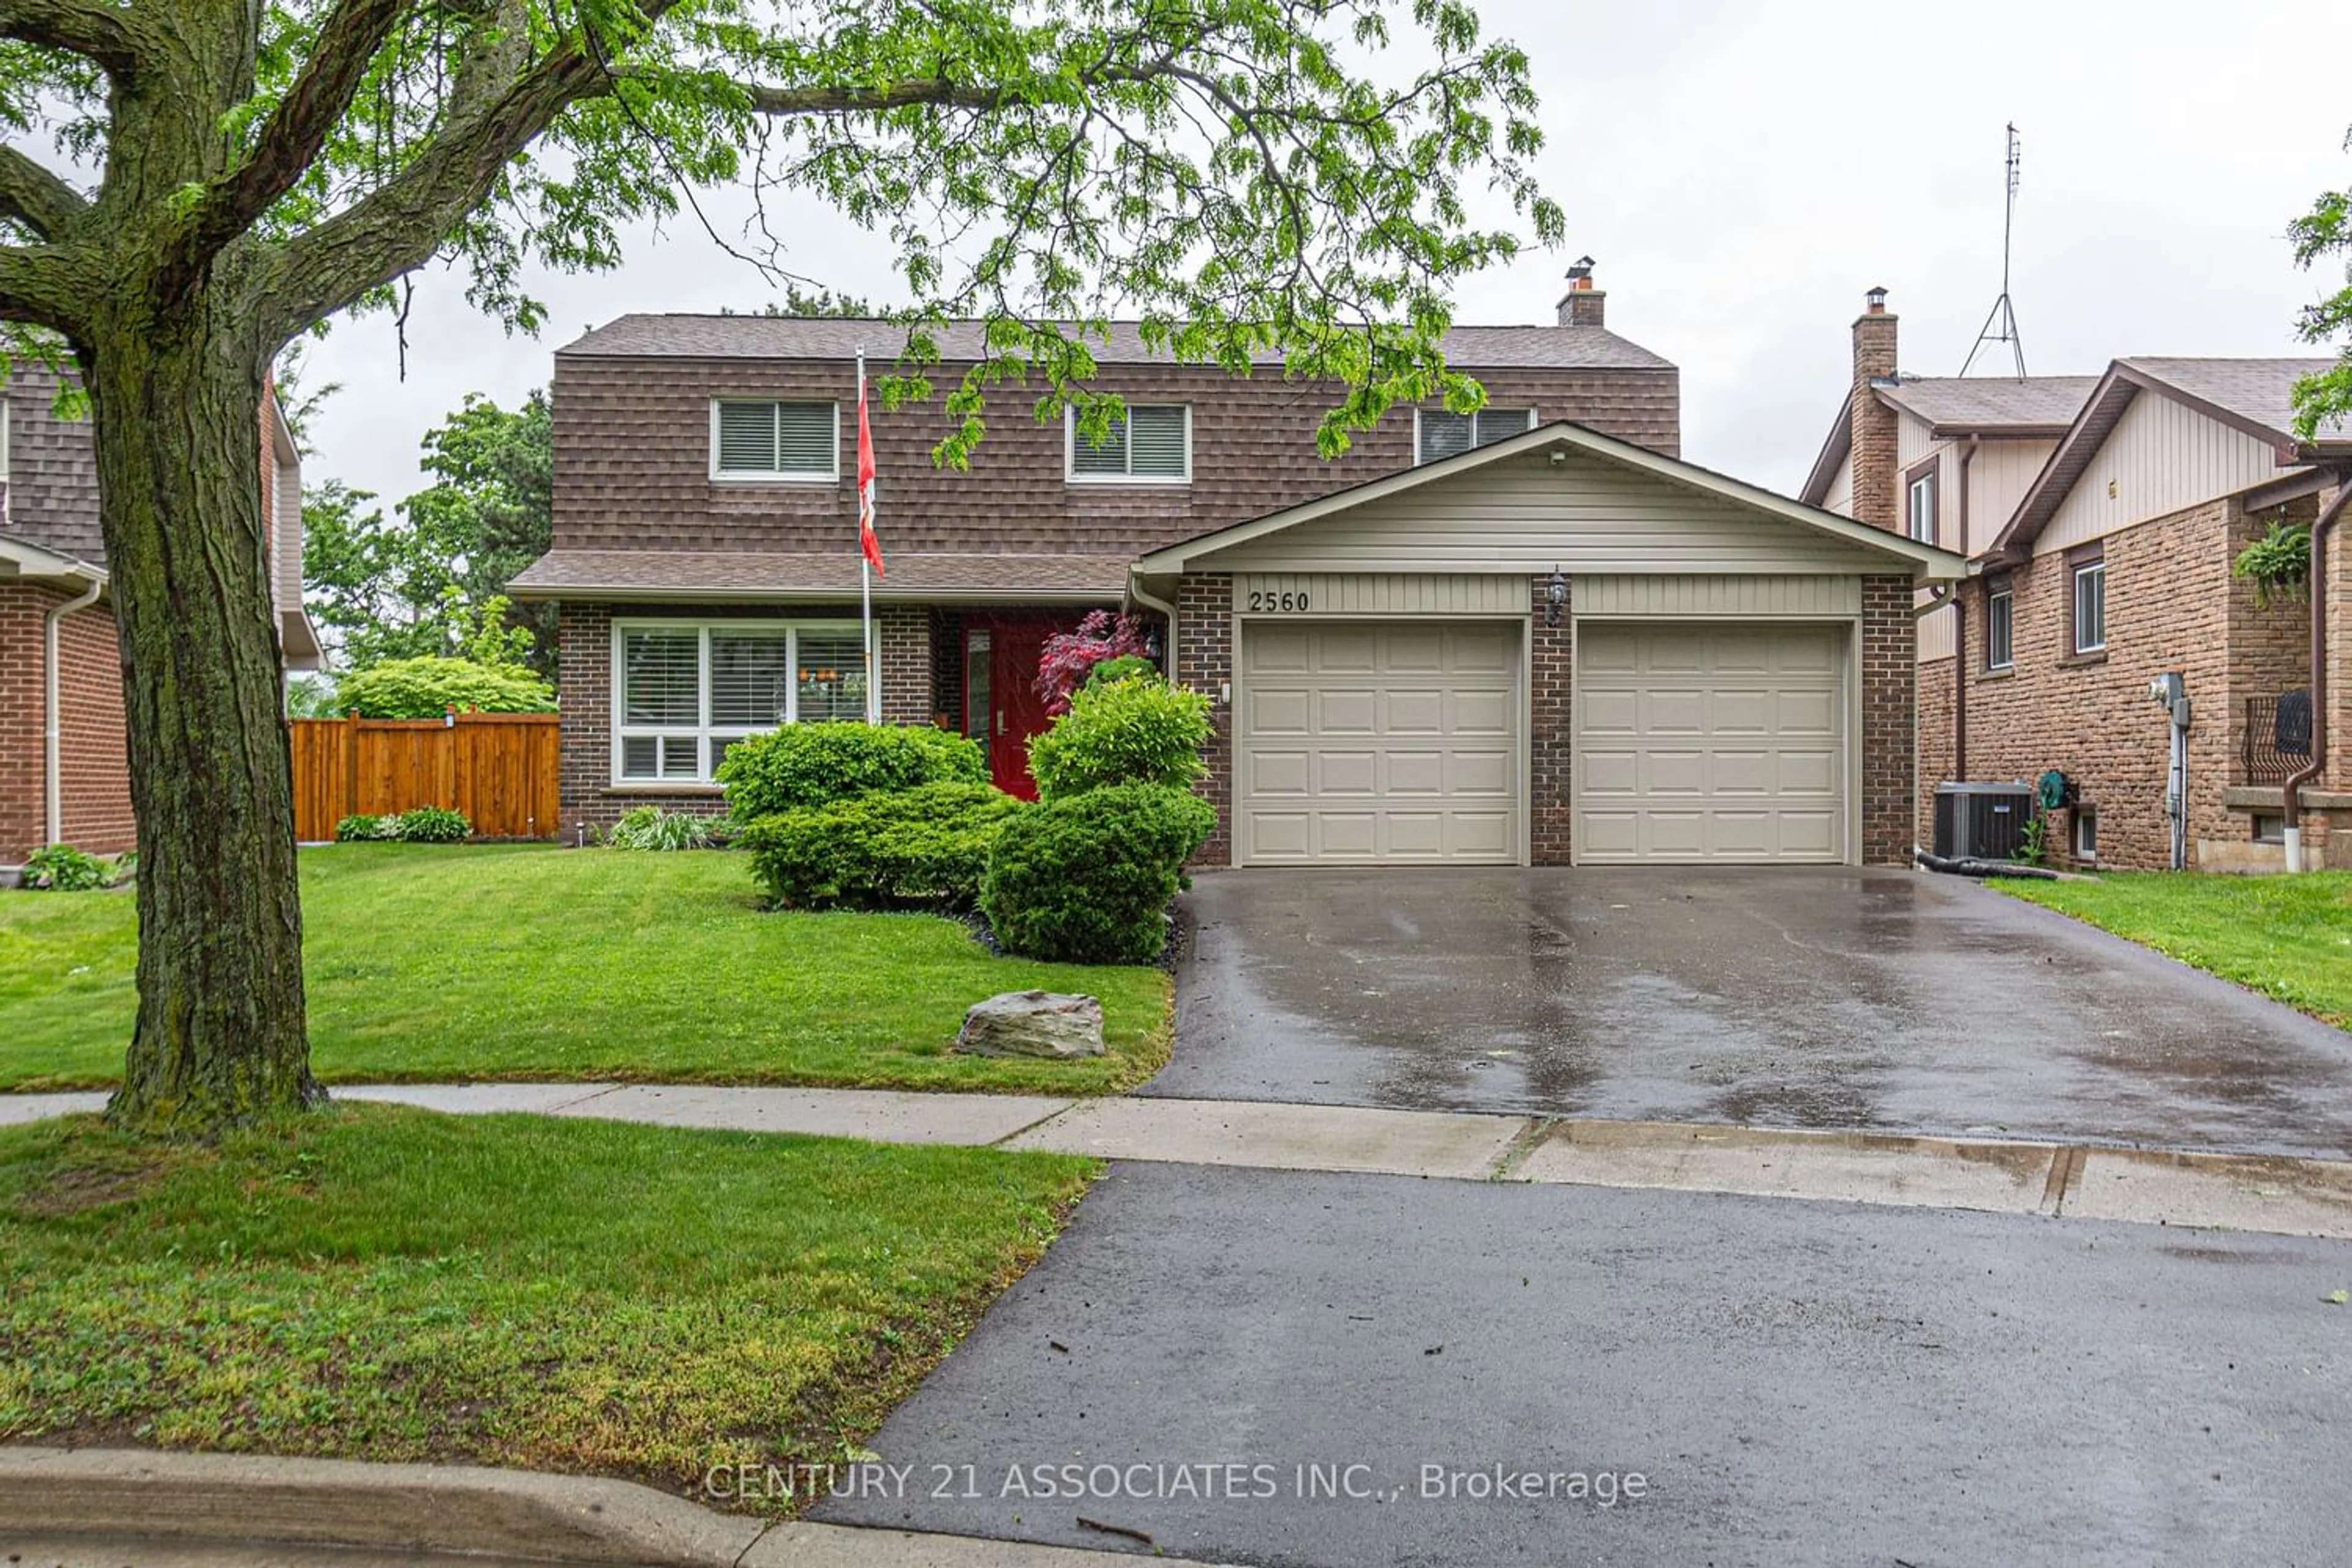 Frontside or backside of a home for 2560 Brasilia Circ, Mississauga Ontario L5N 2G1